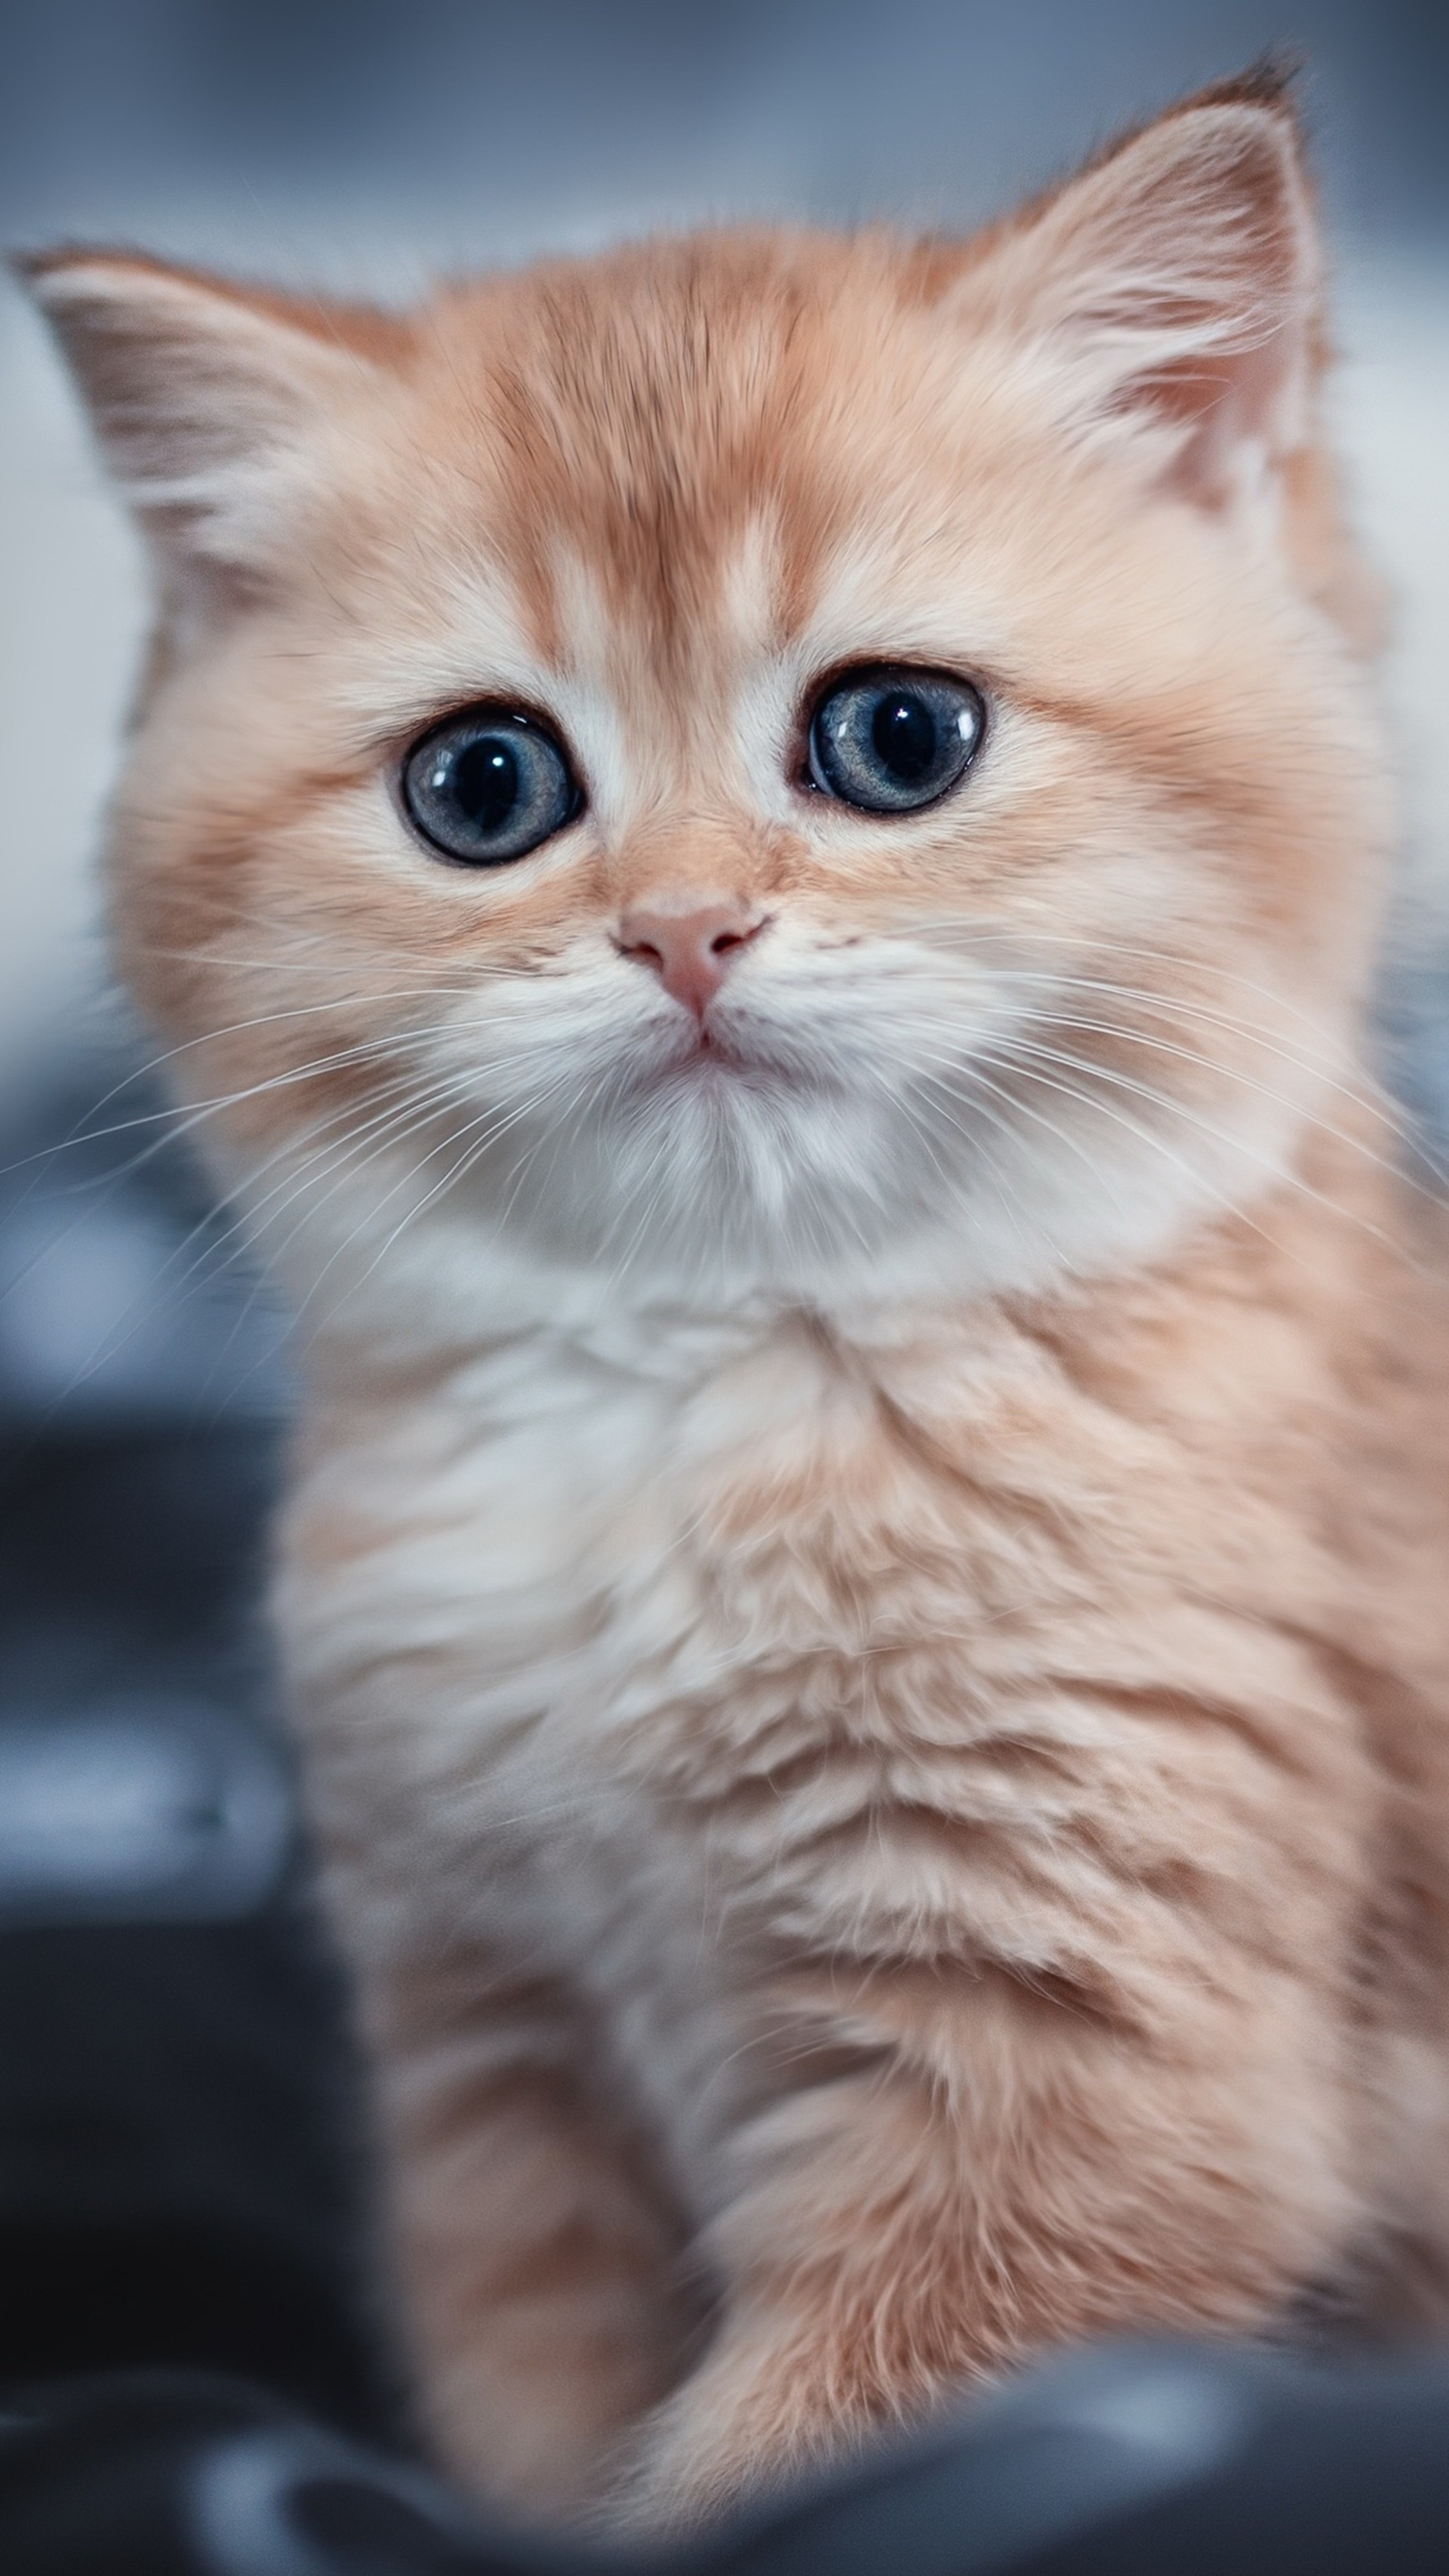 Cute kitten, Sony Xperia XZ, 4K wallpapers, High definition images, 2160x3840 4K Handy